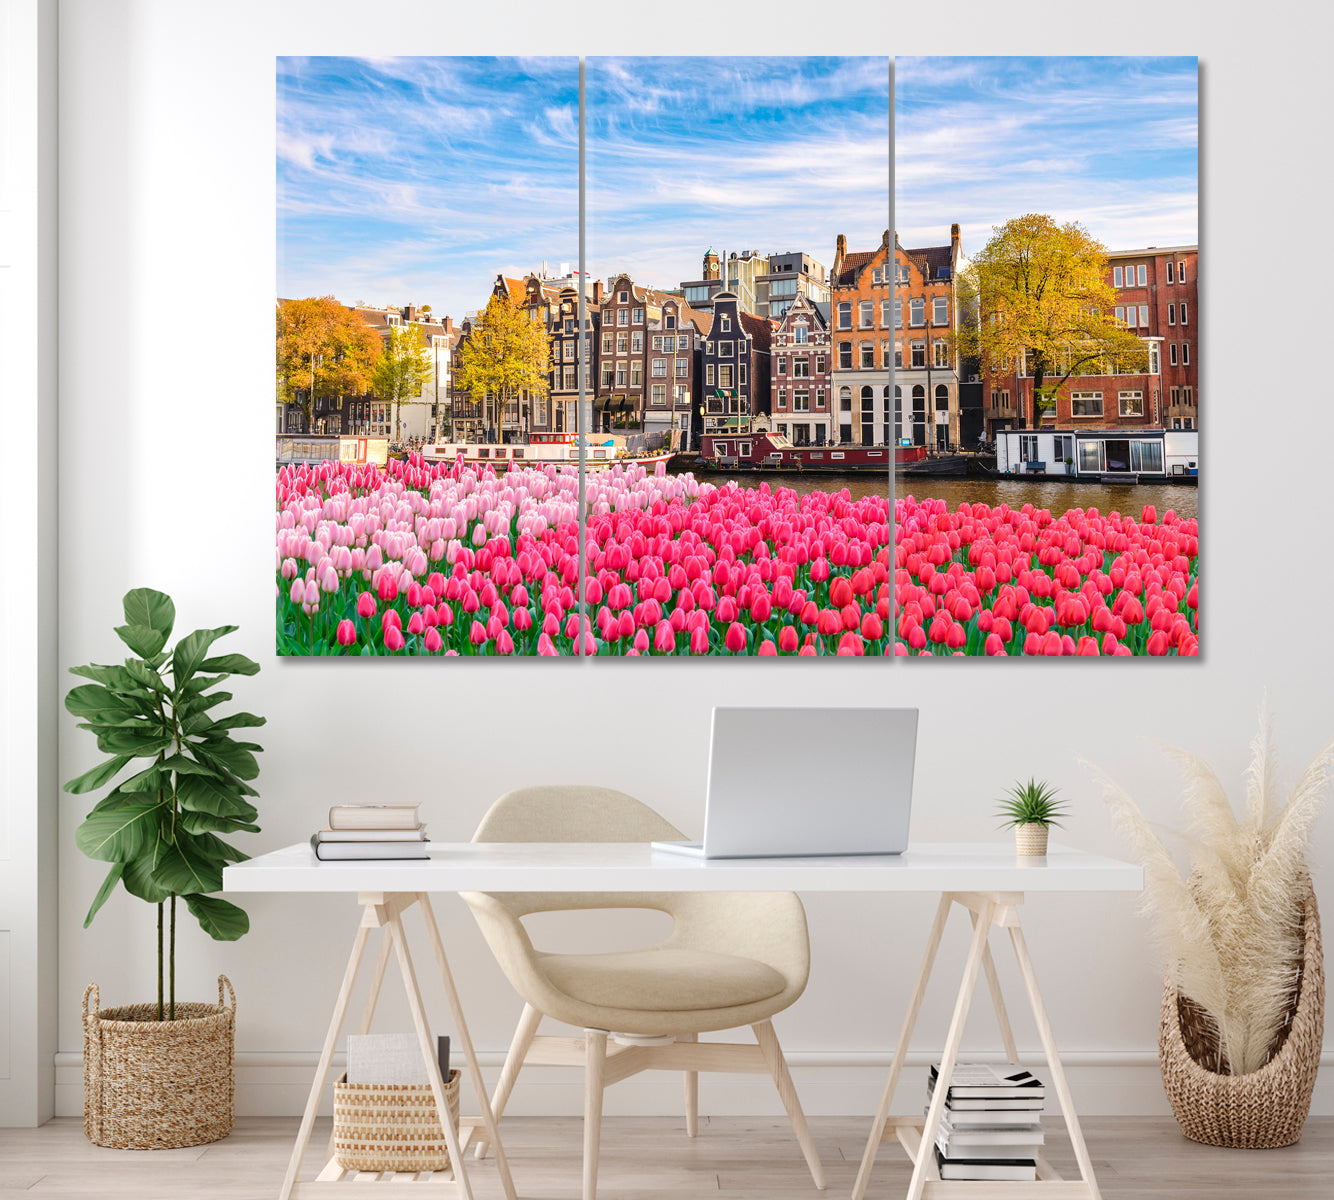 Dutch House with Spring Tulips Flowers Canvas Print ArtLexy 3 Panels 36"x24" inches 